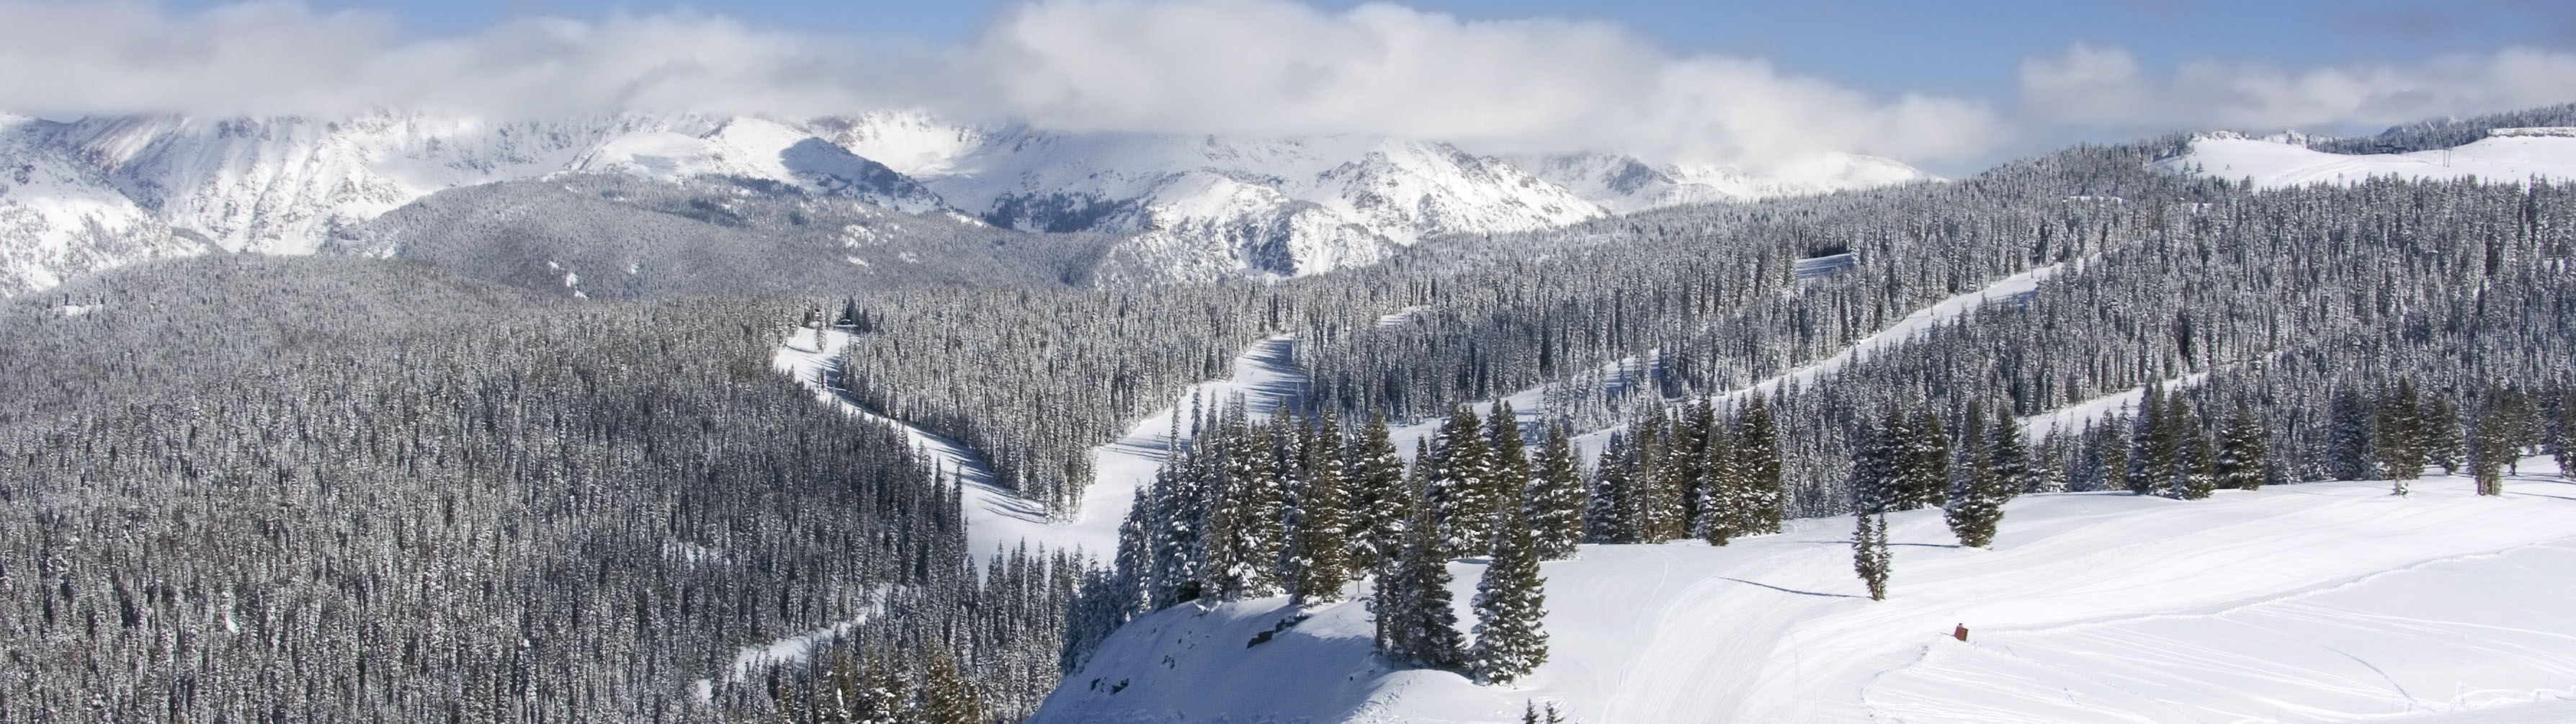 The rolling, snow-packed mountains of Vail on a clear day.